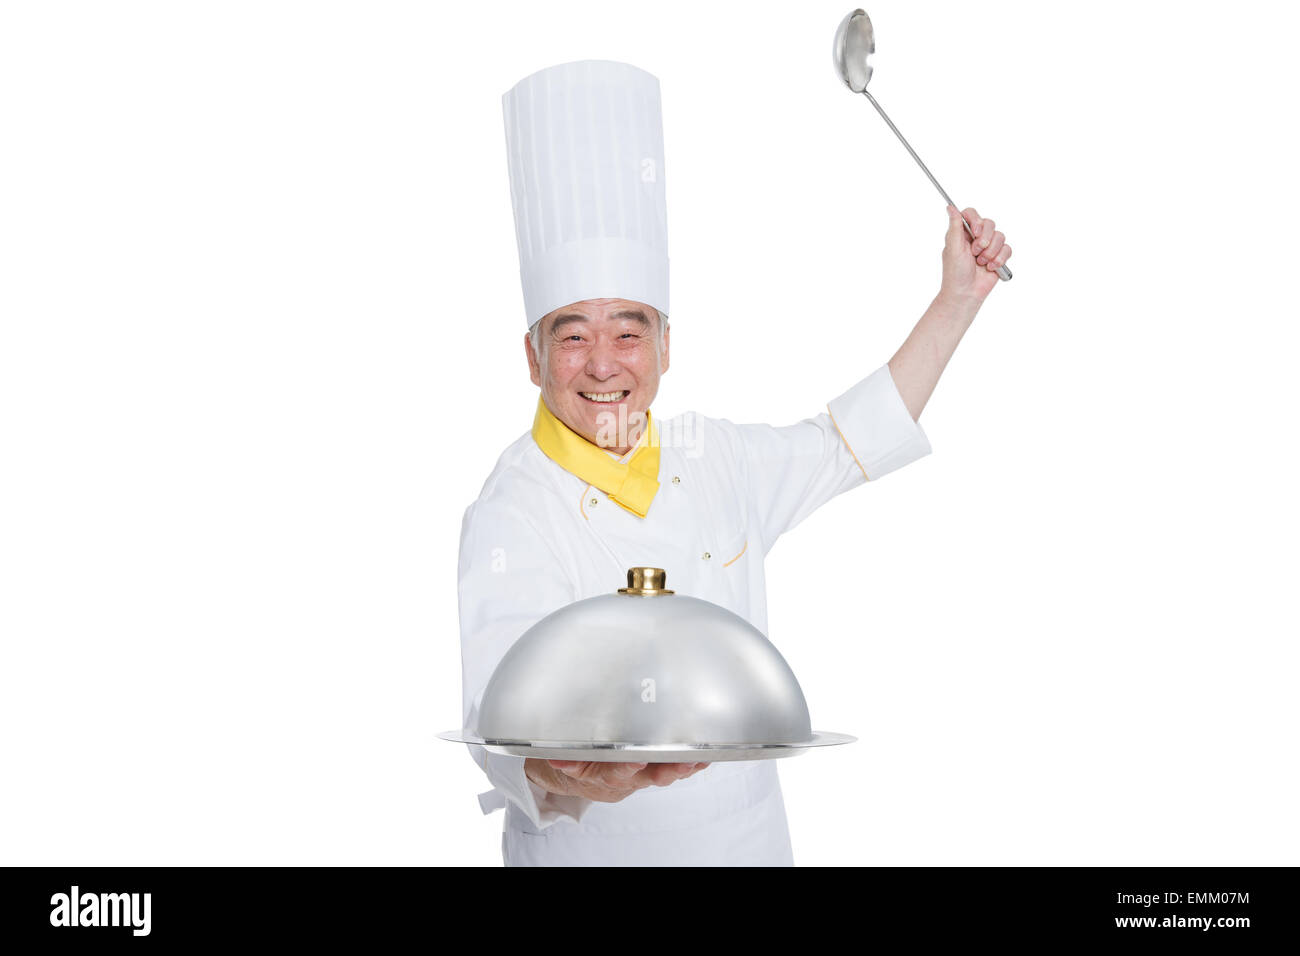 An elderly man wearing a chef's kitchen utensils and appliances Stock Photo